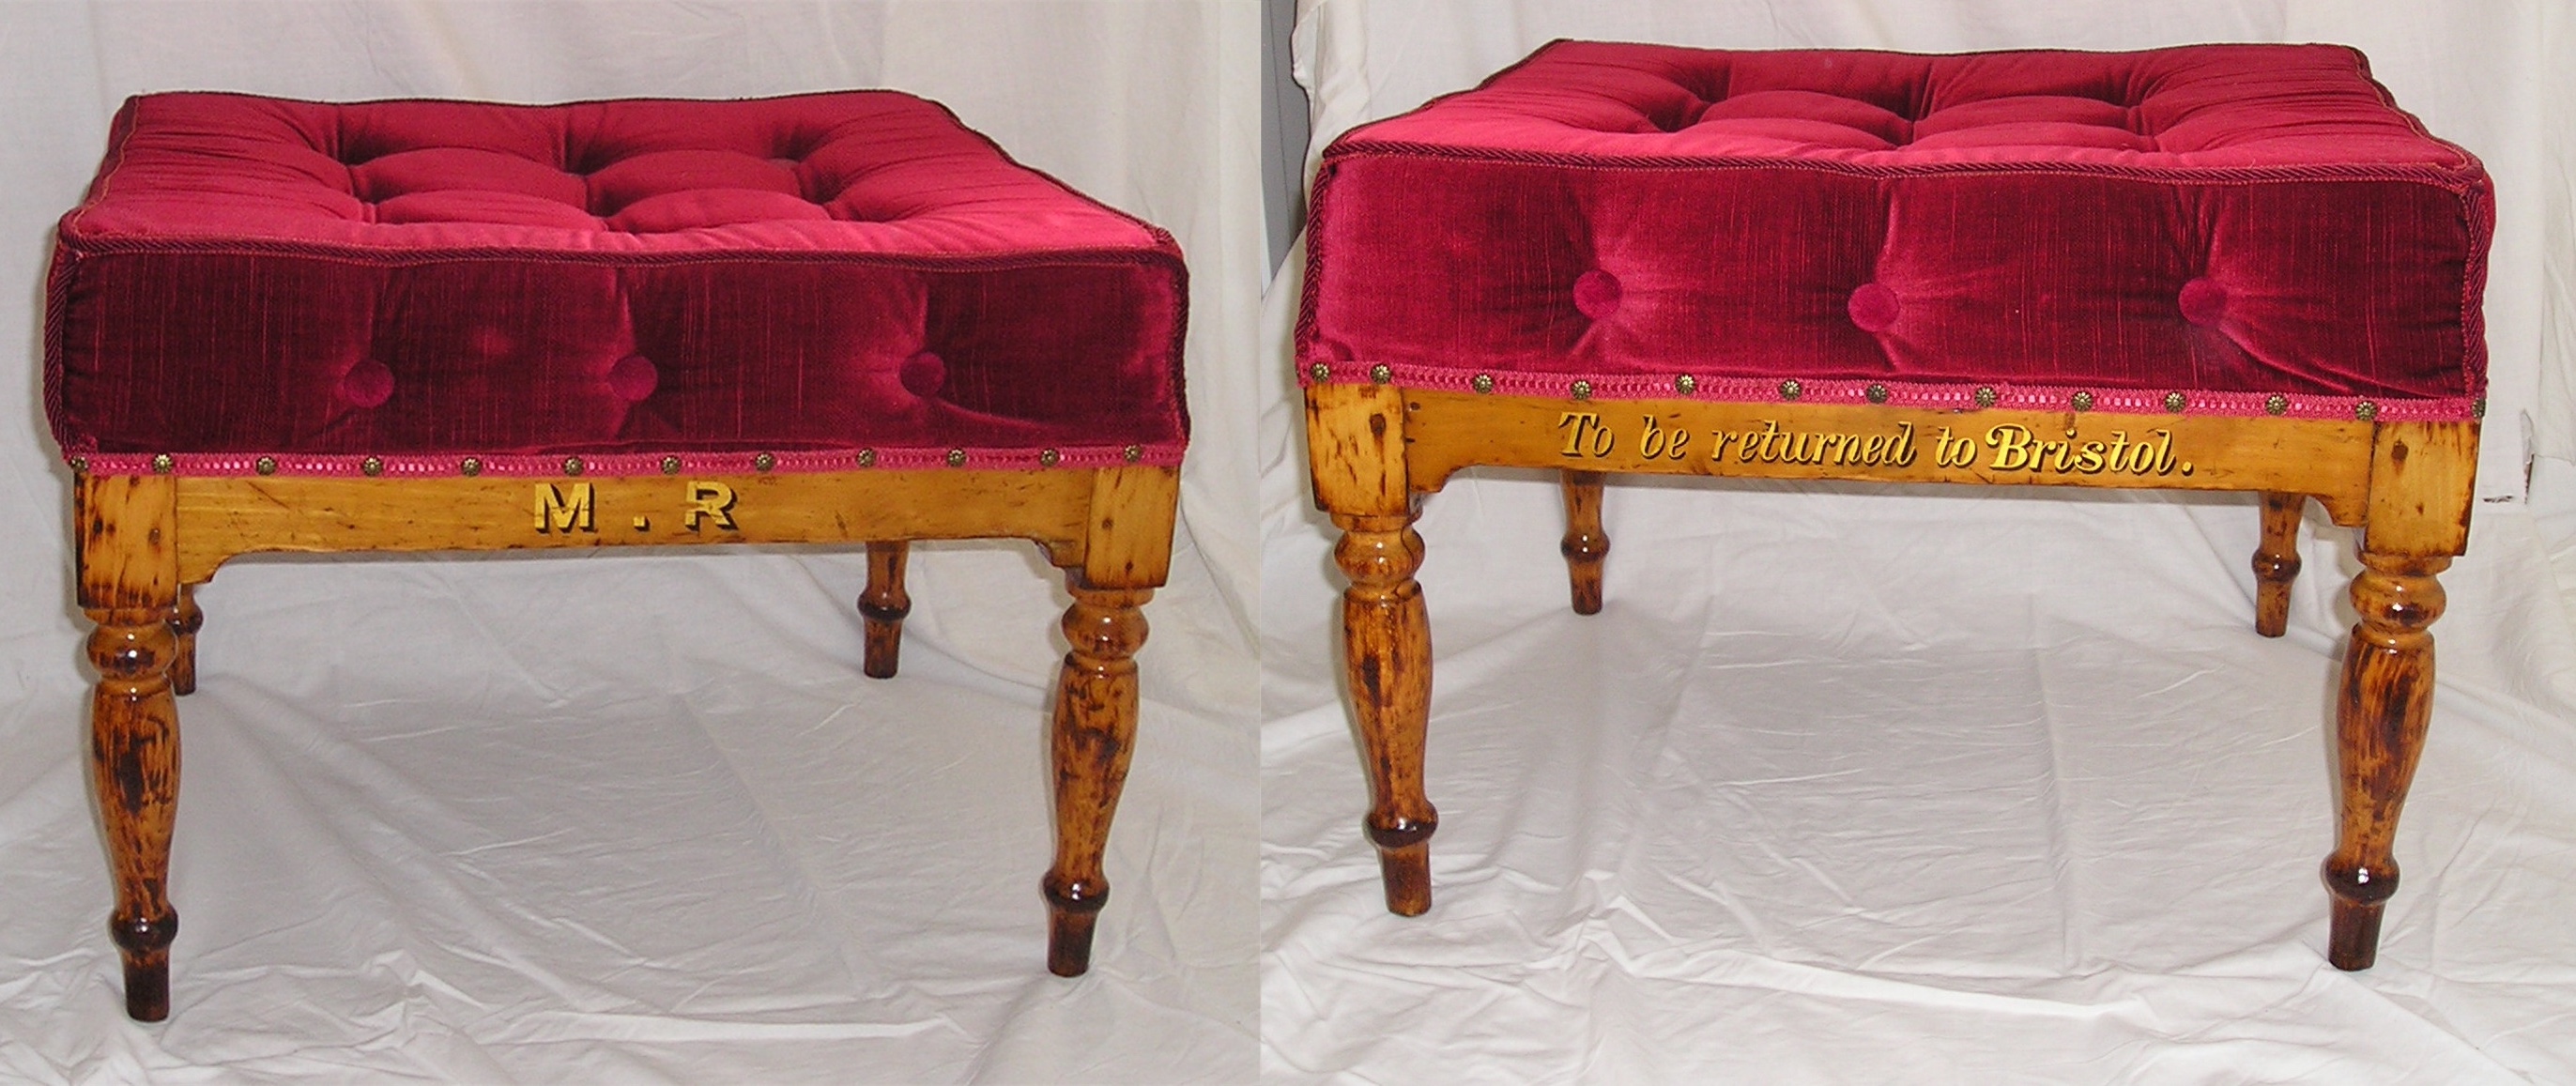 A low, highly varnished wooden stool with deep red upholstery. The front and back are shown side-by-side. The front reads, in gold lettering, 'M.R' while the back reads ' To be returned to Bristol'. 